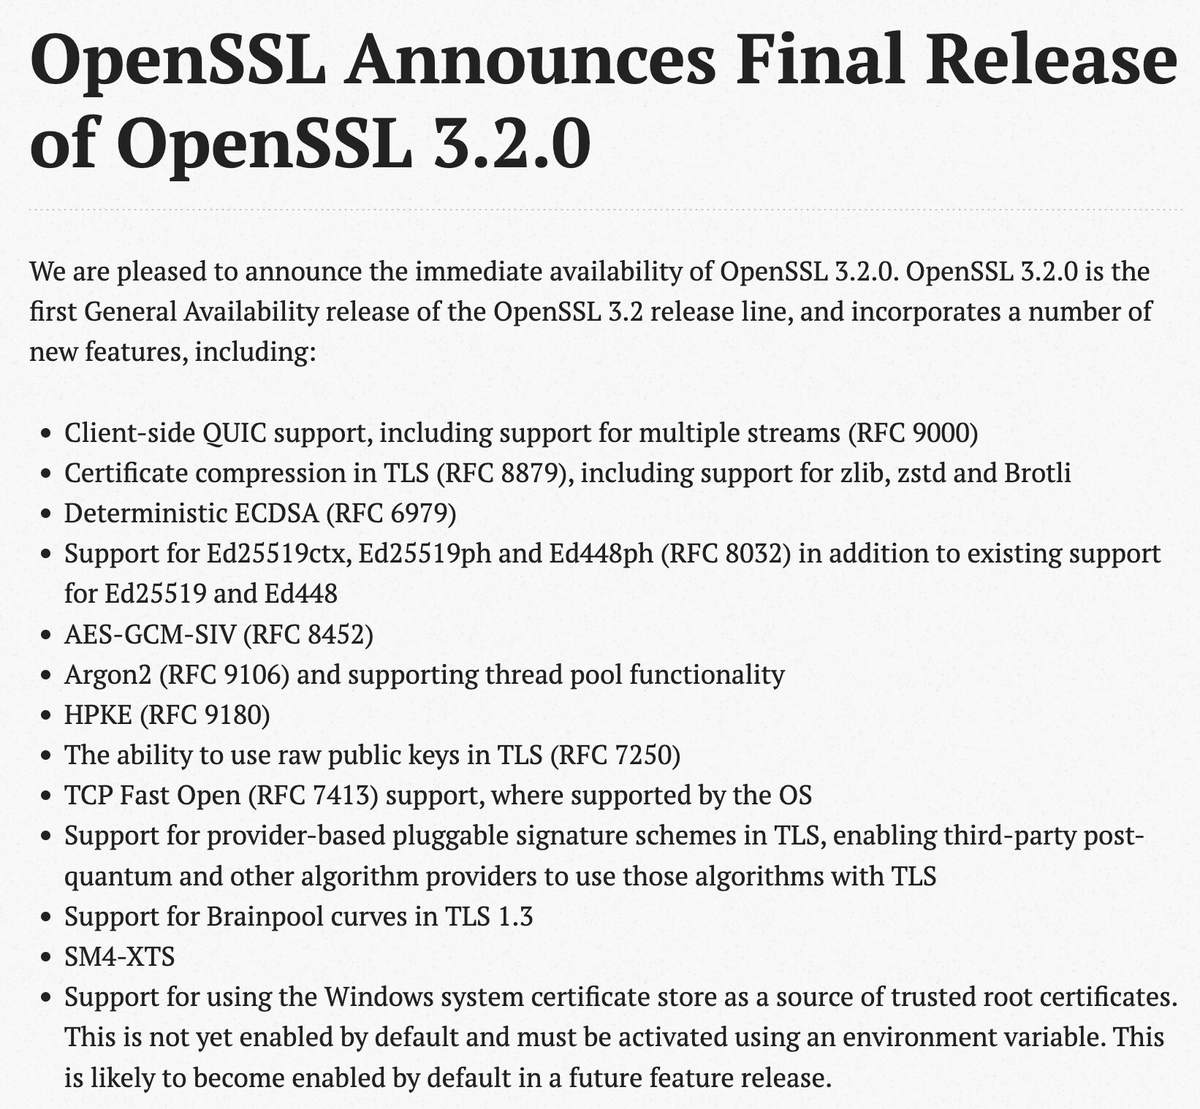 OpenSSL 3.2.0 has support for using Windows OS trust stores, raw public keys for TLS and third-party signature schemes enabling PQC signatures to be experimented with, certificate compression which is important for PQC certificates, and Hybrid Public Key Encryption (HPKE). All